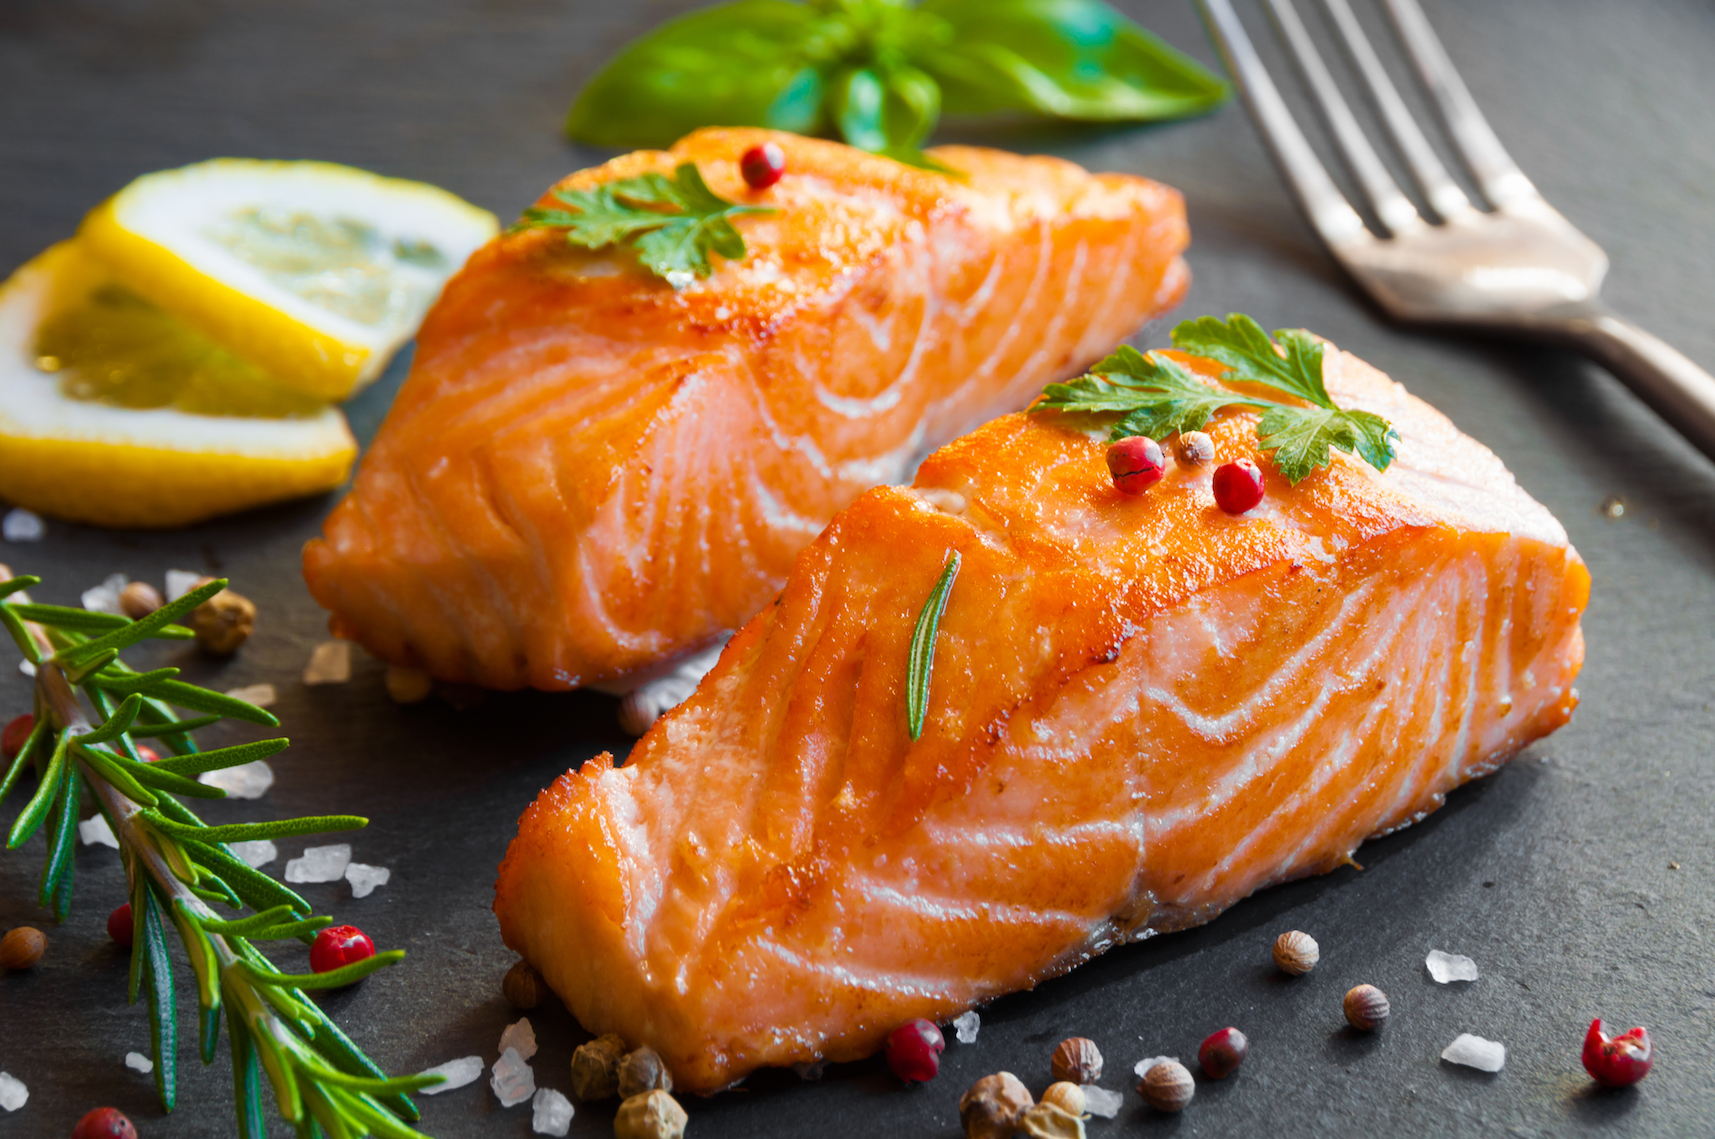 Salmon is the best food to increase sexual power because it has healthy omega-3 fatty acids